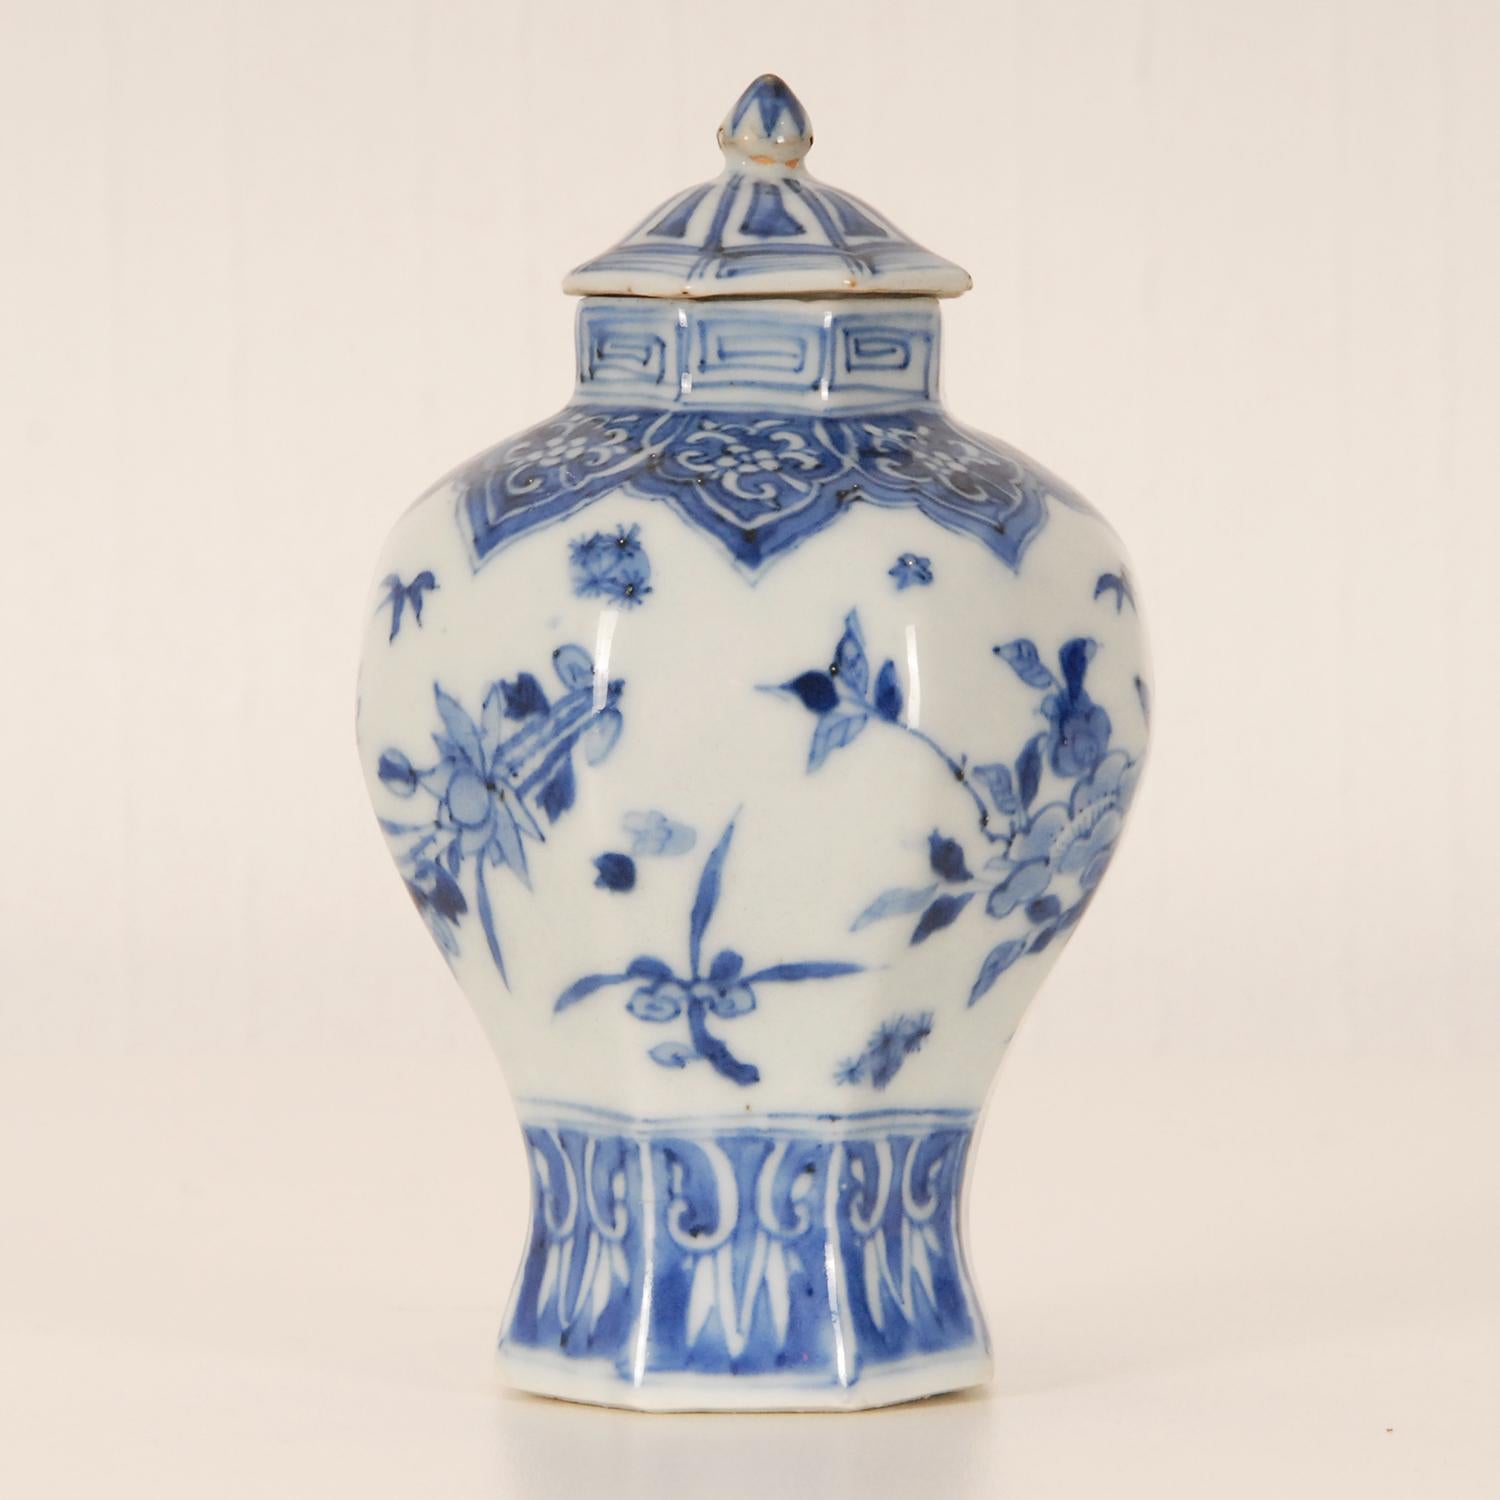 17th century Chinese Ming Porcelain Ceramic Blue and White Vase Covered For Sale 1